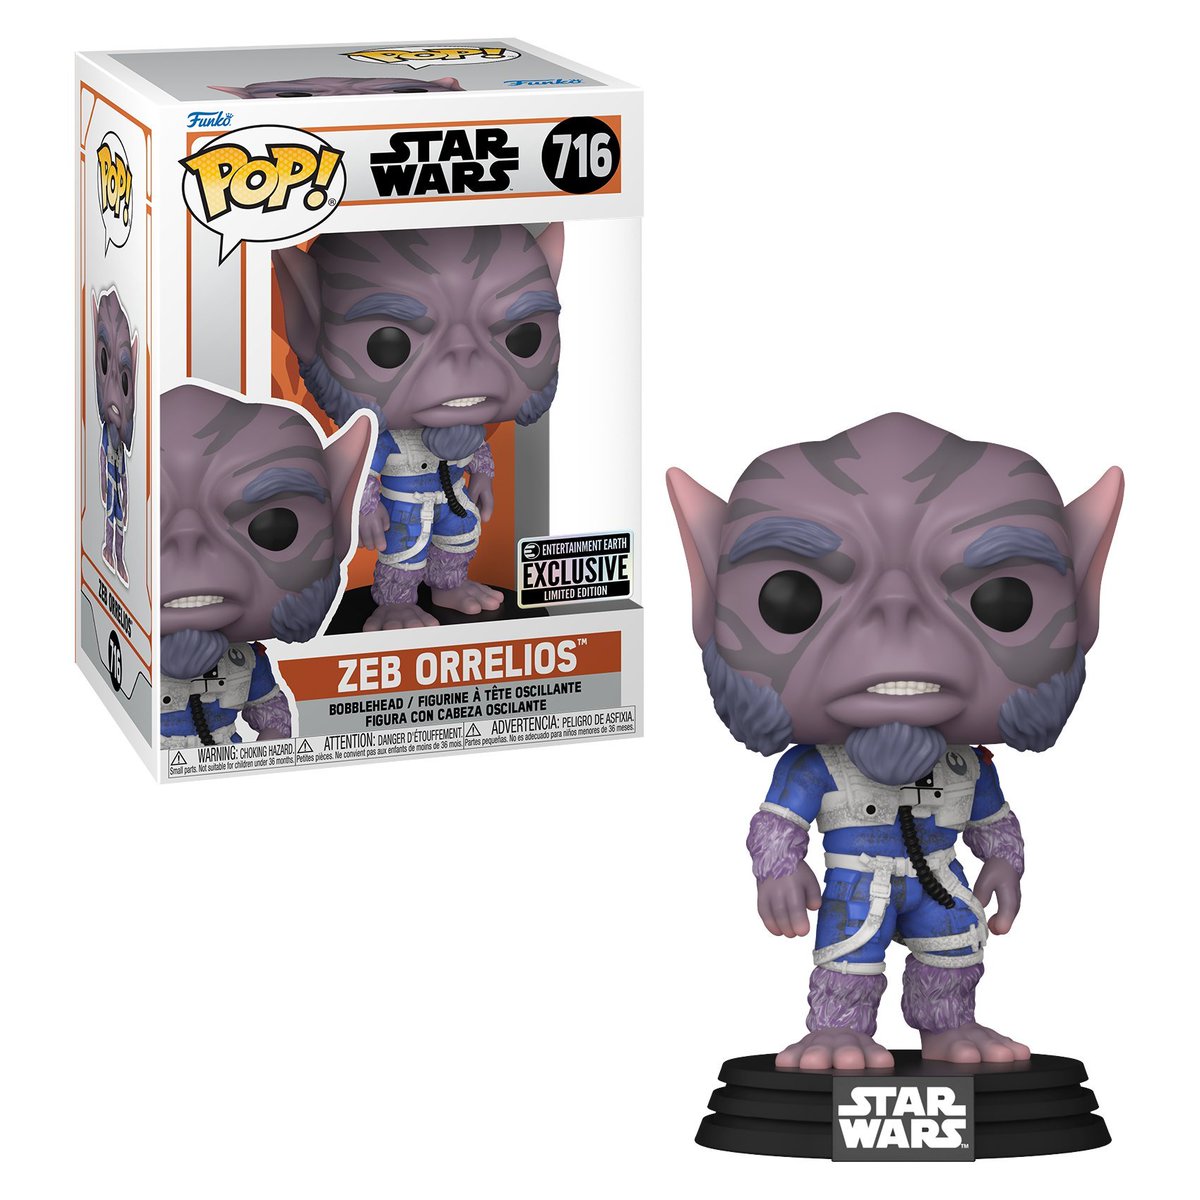 Available Now: Entertainment Earth Exclusive Star Wars - Zeb Orrelios Funko Pop! Vinyl Link: ee.toys/TOHXJJ * No Charge Until it Ships #Ad #StarWars #TheMandalorian #StarWarsRebels #MayThe4thBeWithYou #MayTheFourthBeWithYou #Funko #FunkoPop #FunkoPops #FunkoPopVinyl…